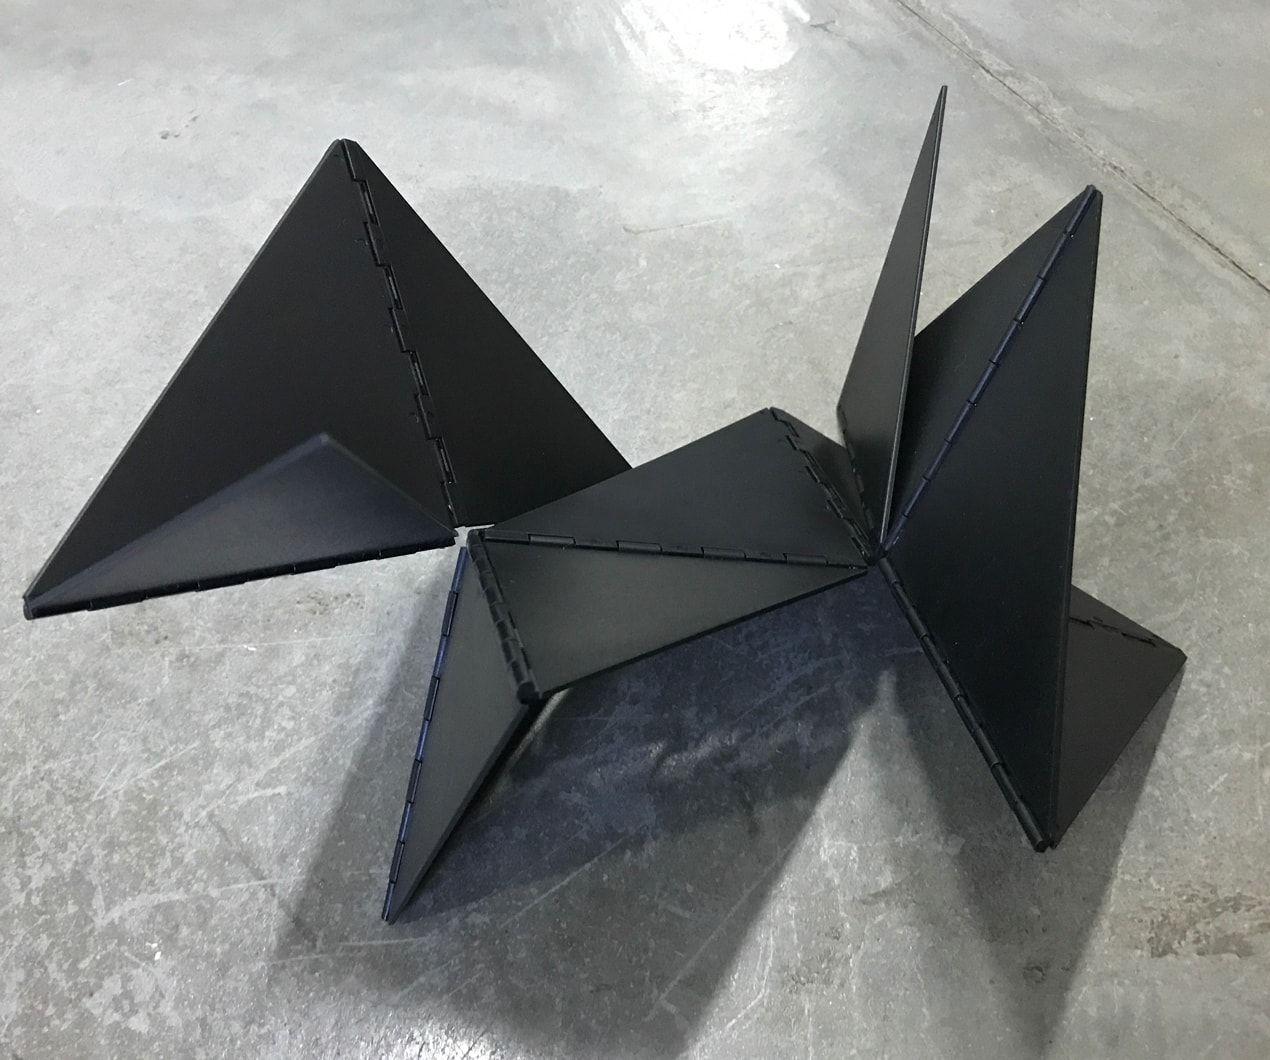 Model based on the work of Lygia Clark, authorized by the heirs and by the Cultural Association 